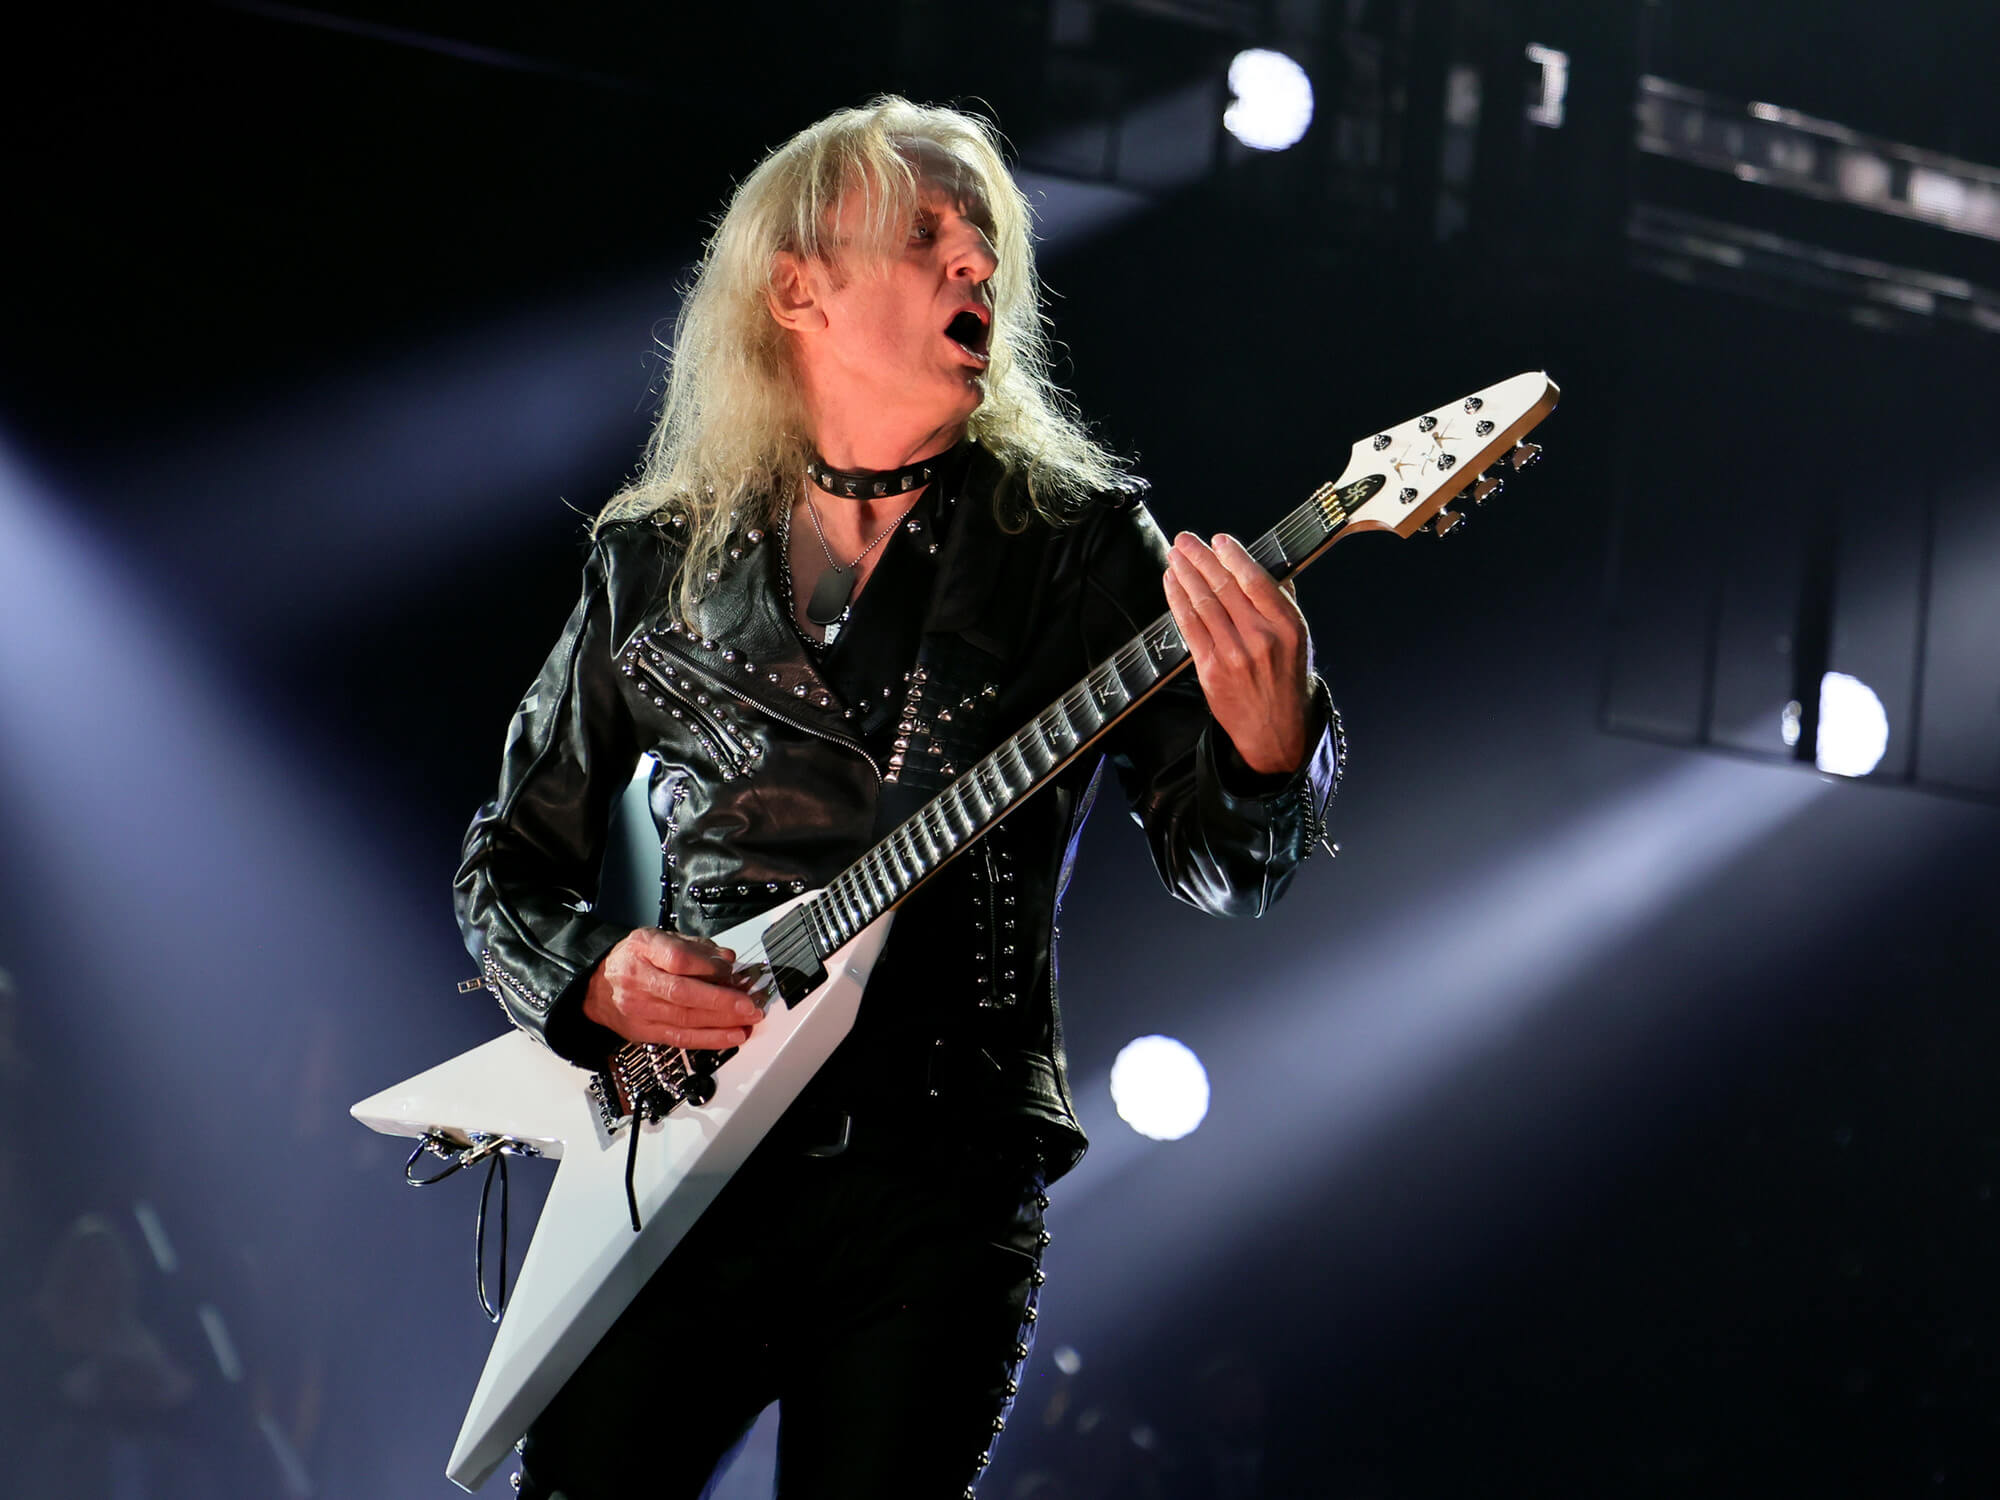 KK Downing playing the guitar on stage